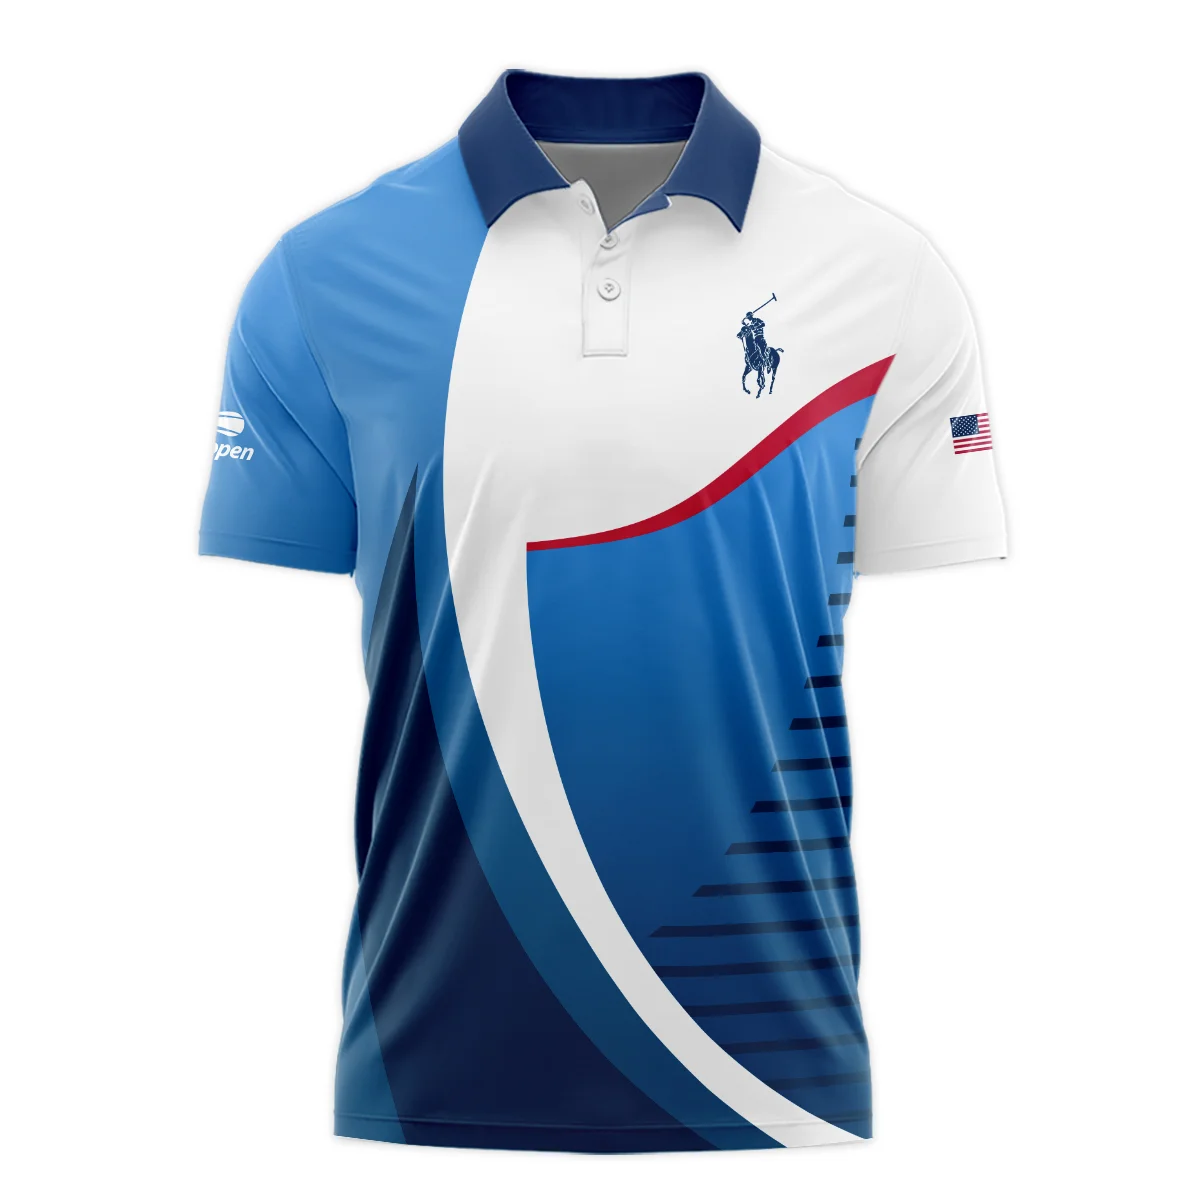 US Open Tennis Champions Ralph Lauren Dark Blue Red White Polo Shirt Style Classic Polo Shirt For Men